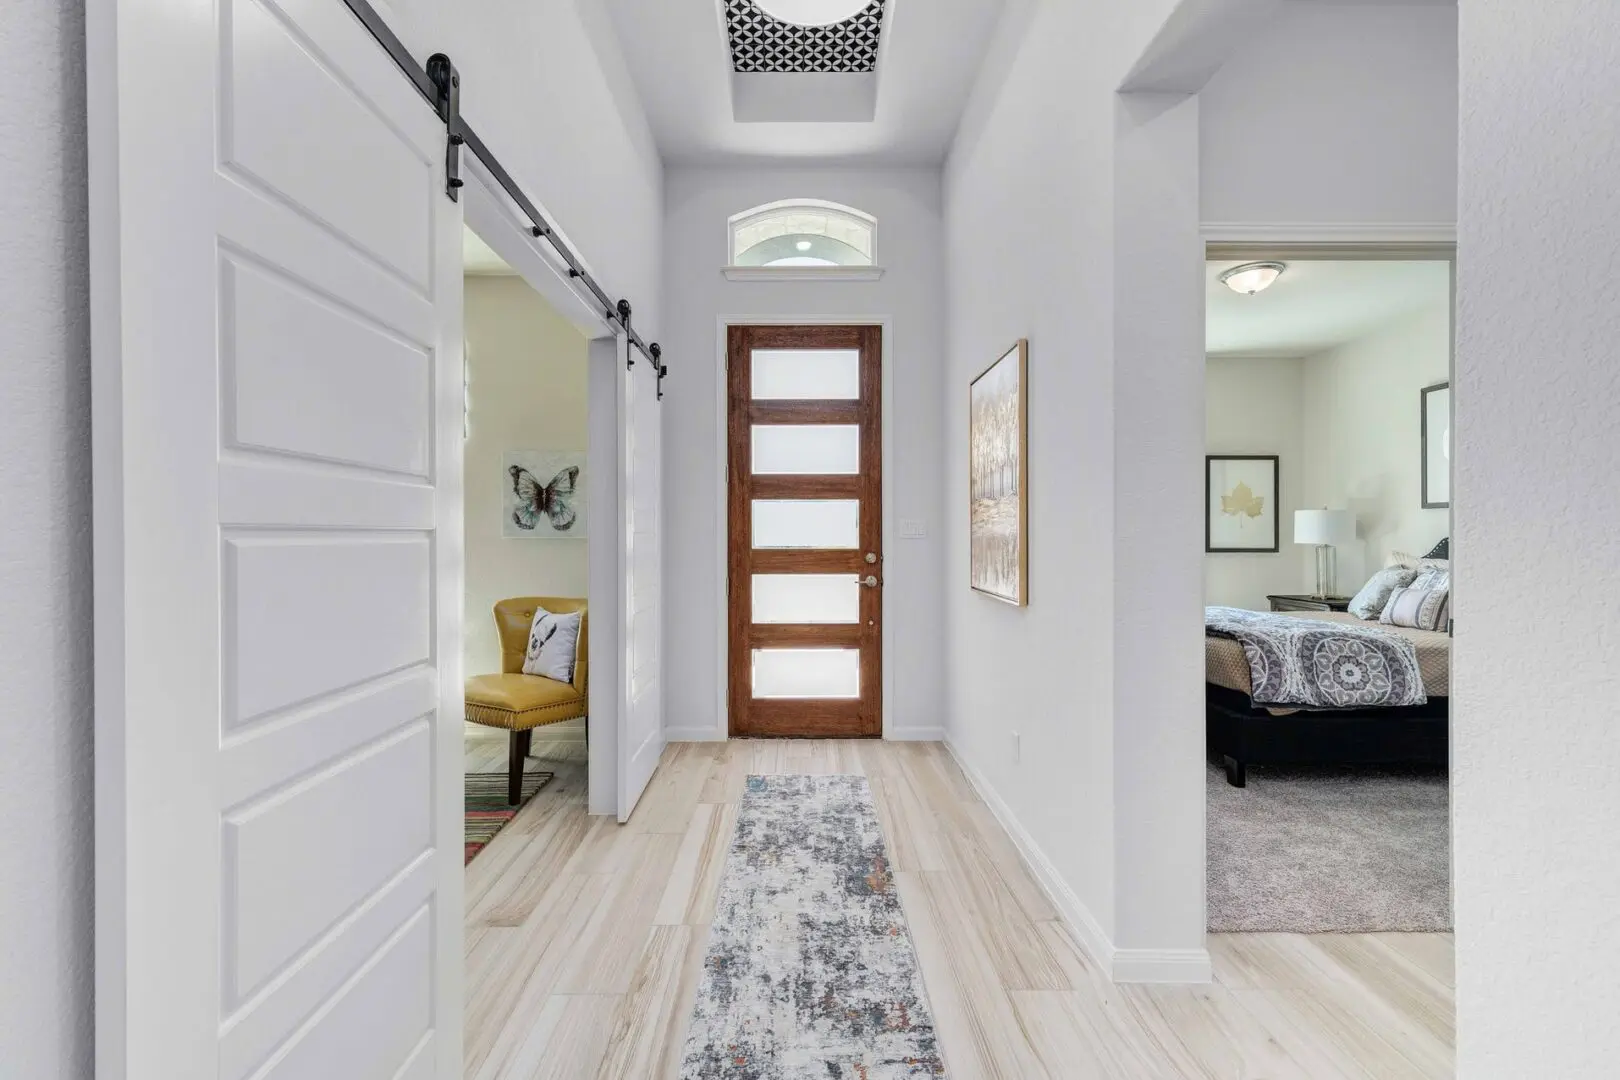 A hallway in a home with wooden floors and a door.